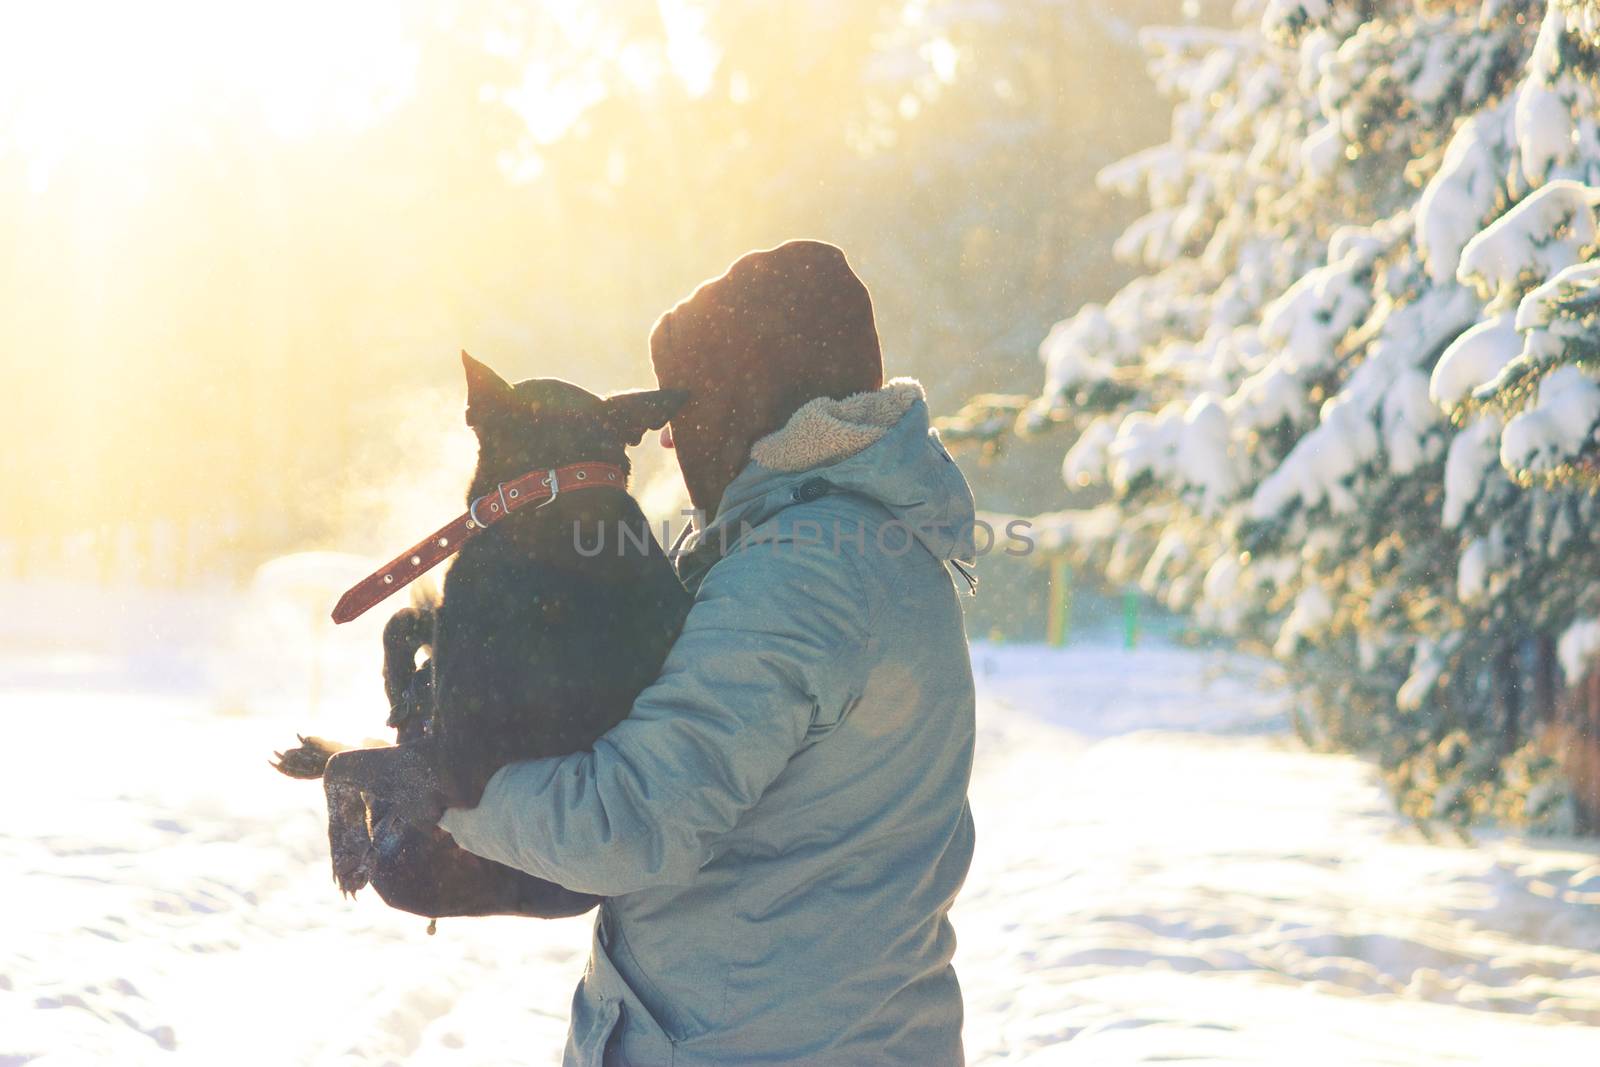 man take dog on his arm, because the dog is ill. winter